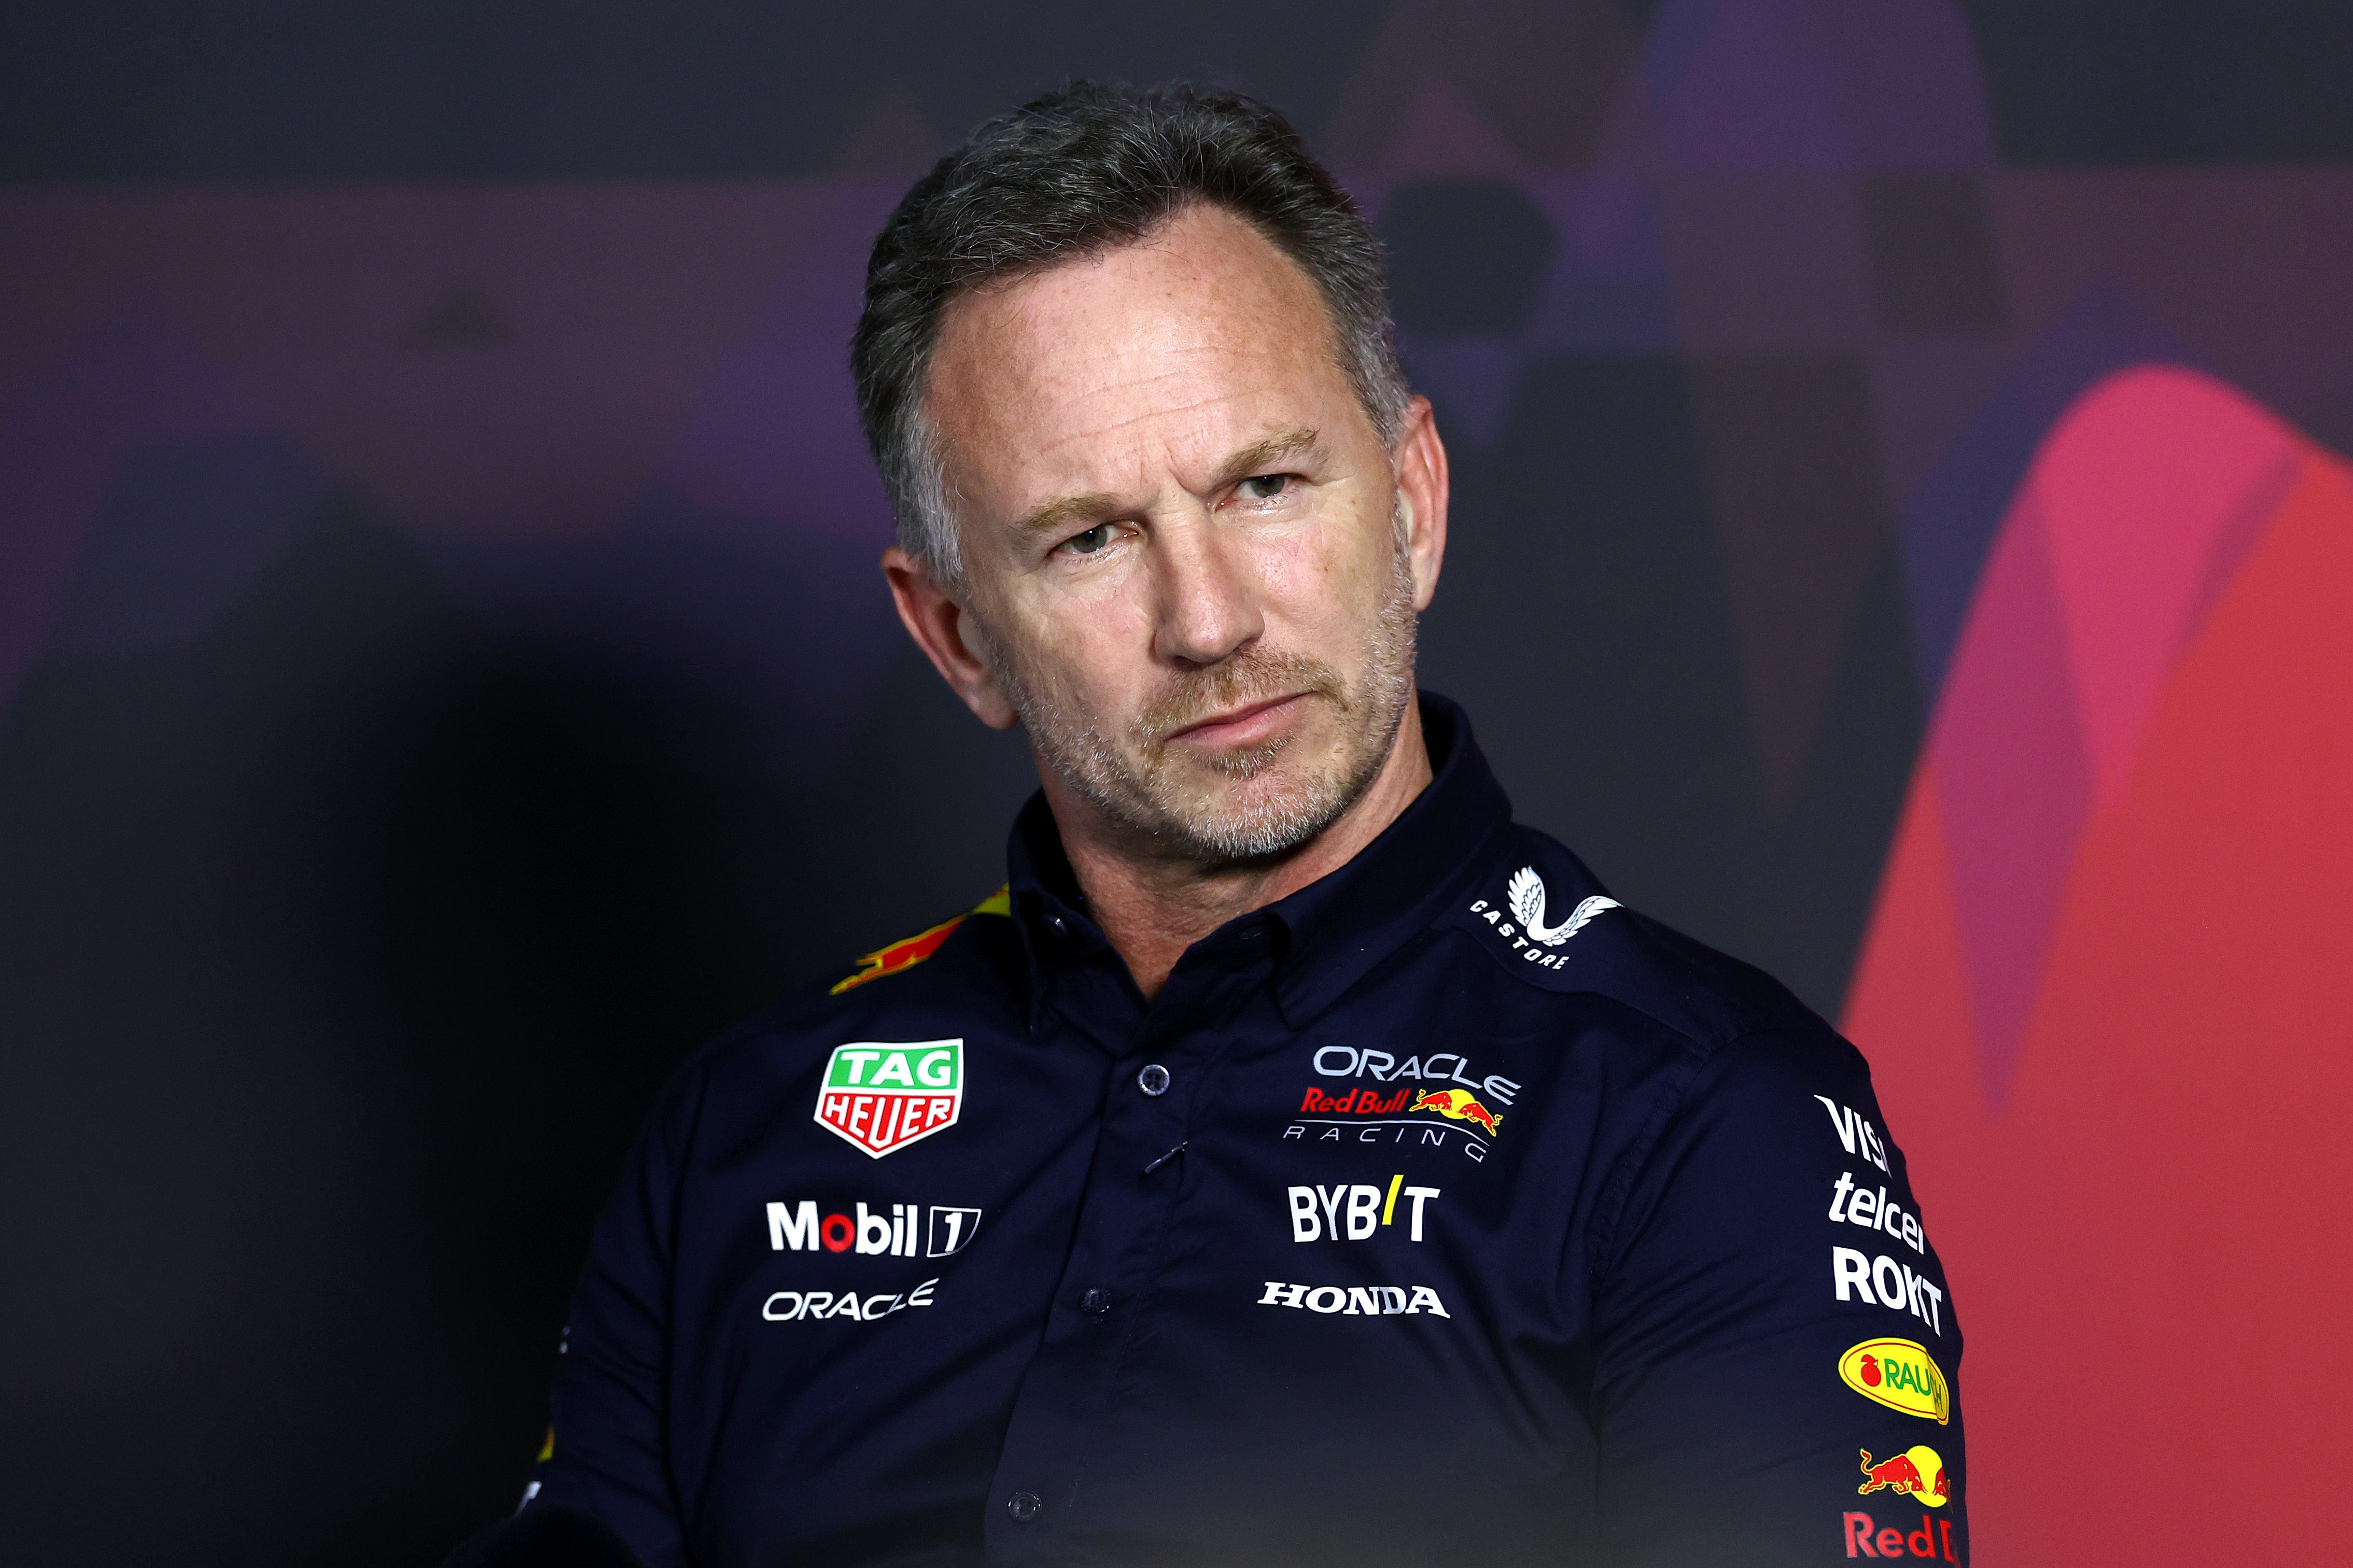 Christian Horner implored on Thursday: ‘The intrusion on my family is enough’